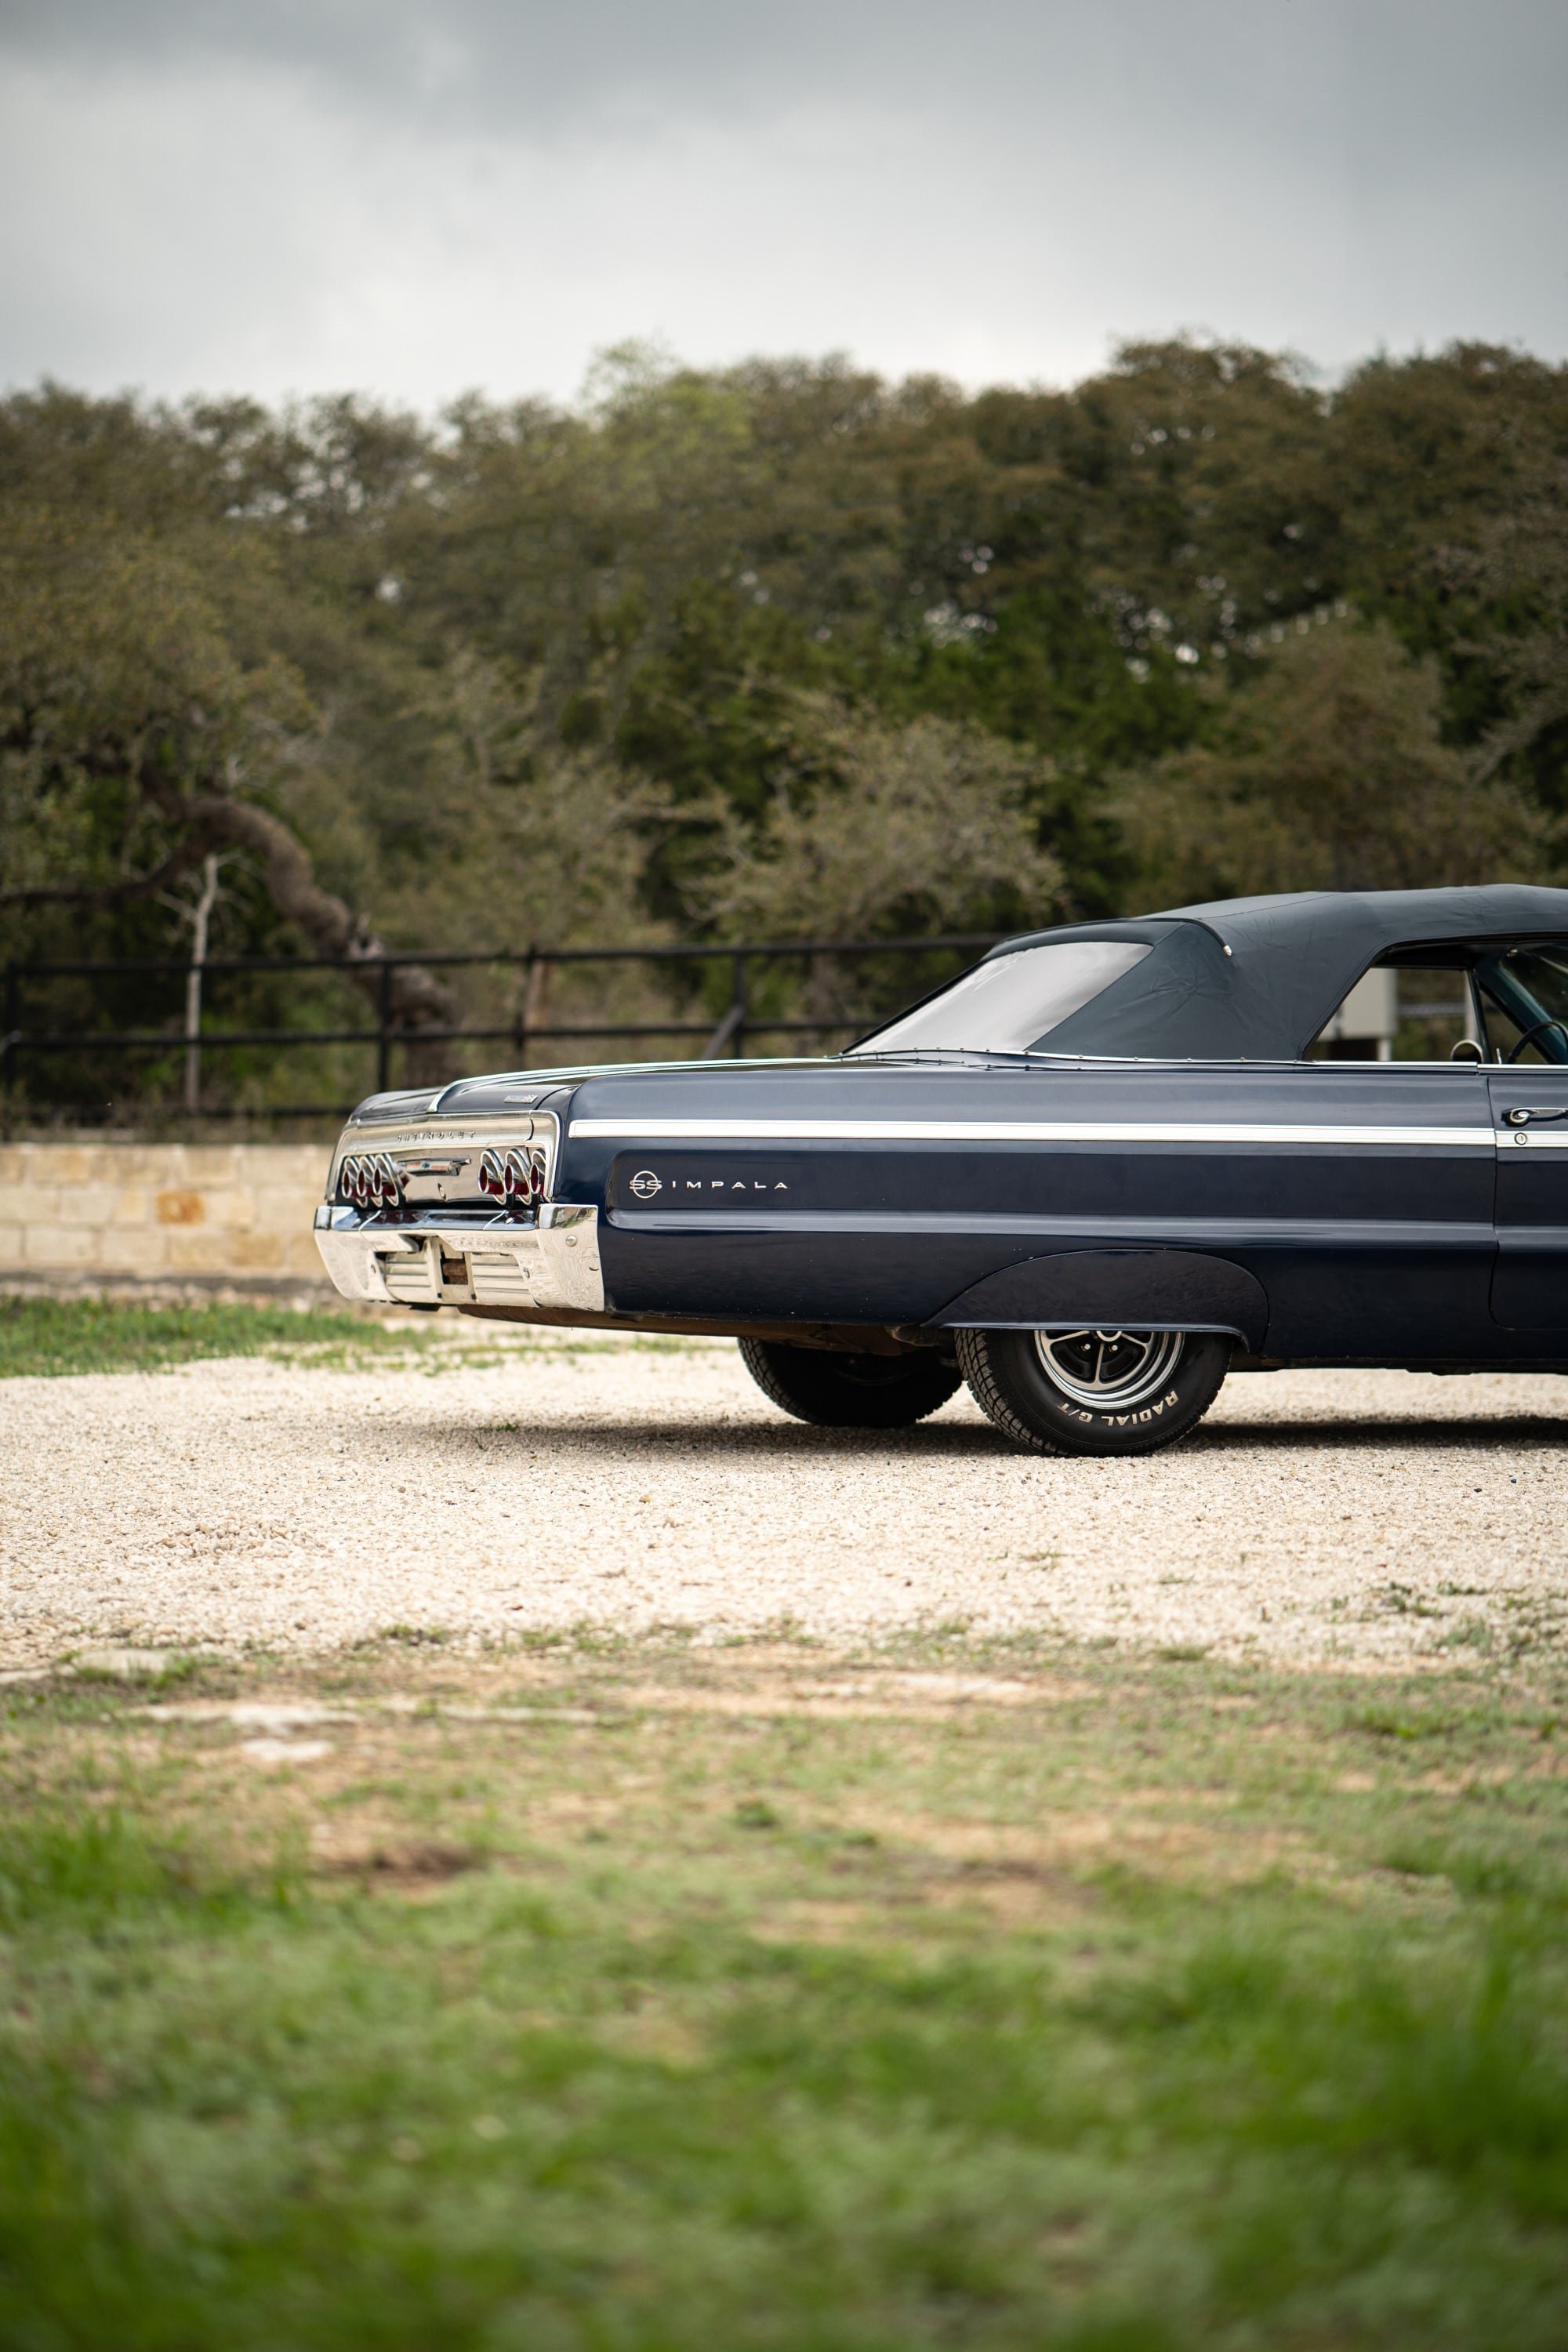 Blue Impala SS Convertible in Dripping Springs, TX